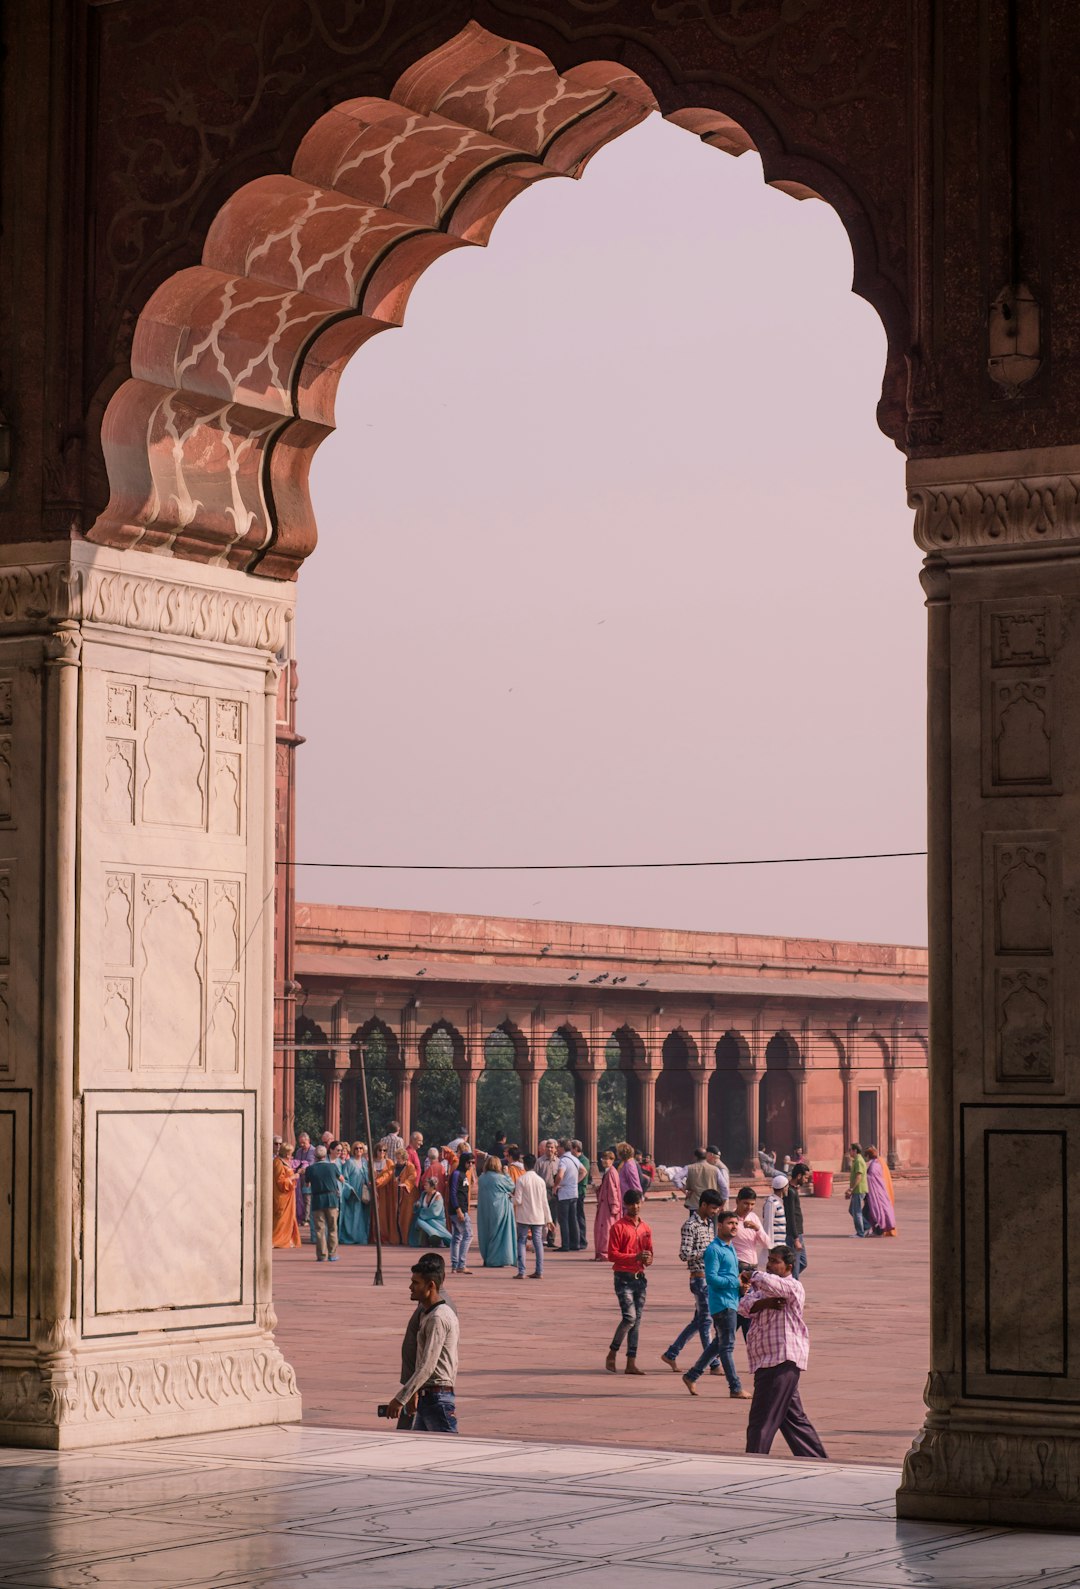 Travel Tips and Stories of Jama Masjid in India